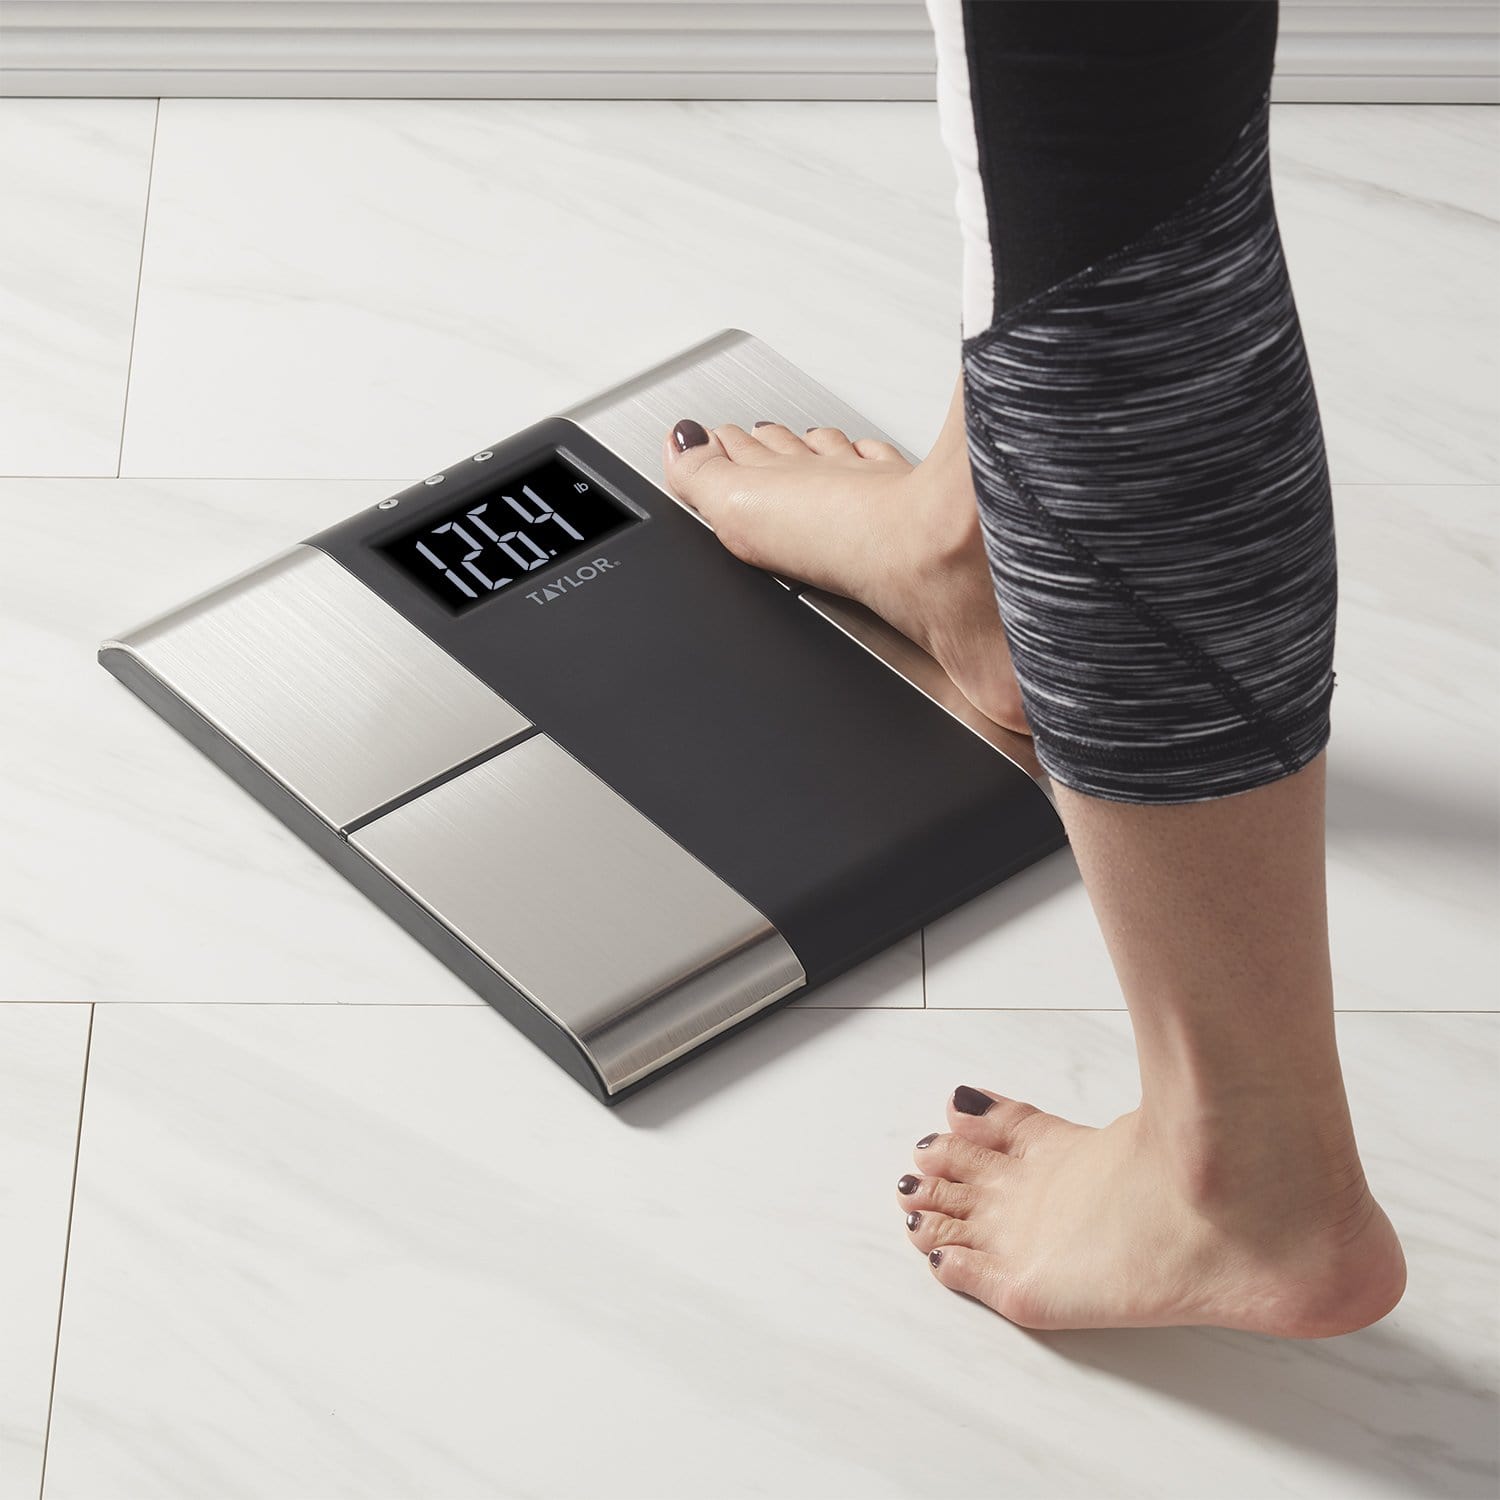 Greater Goods Body Composition Scale, an Accurate Digital Weight Scale  Calculates Body Composition Weight, Muscle Mass, Body Fat, Water Weight,  and